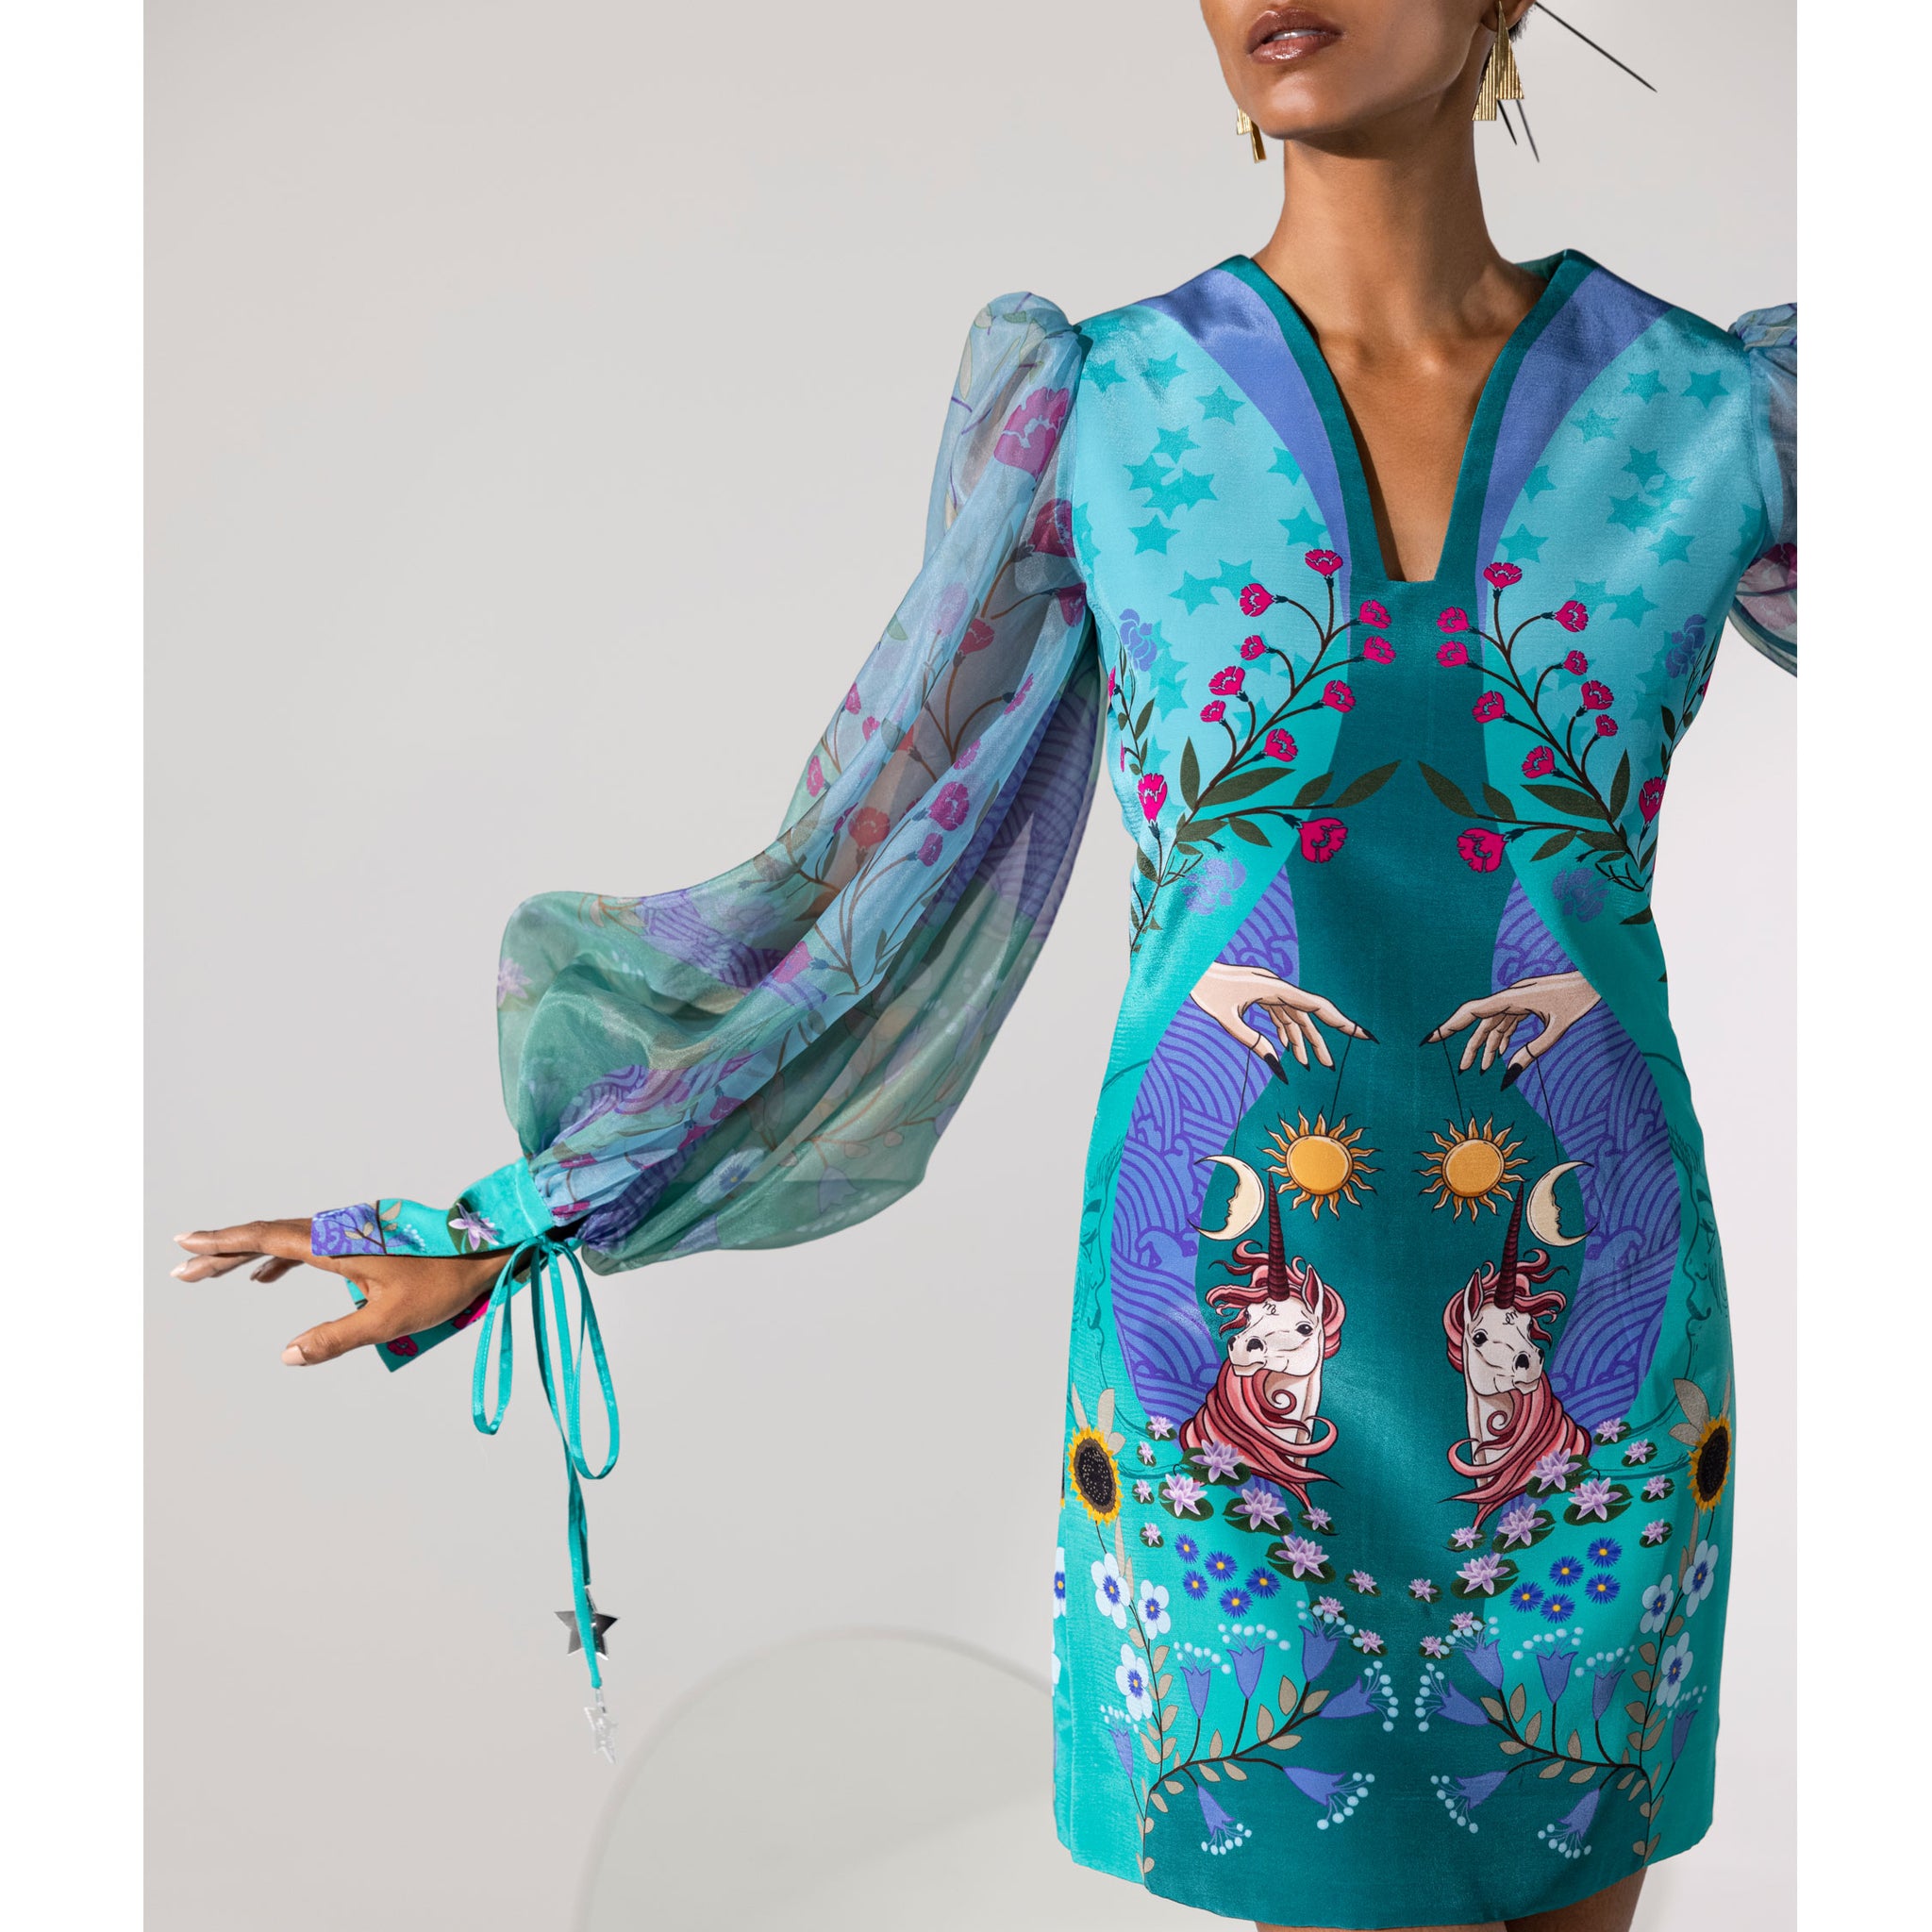 Printed Dress with Statement Sleeves